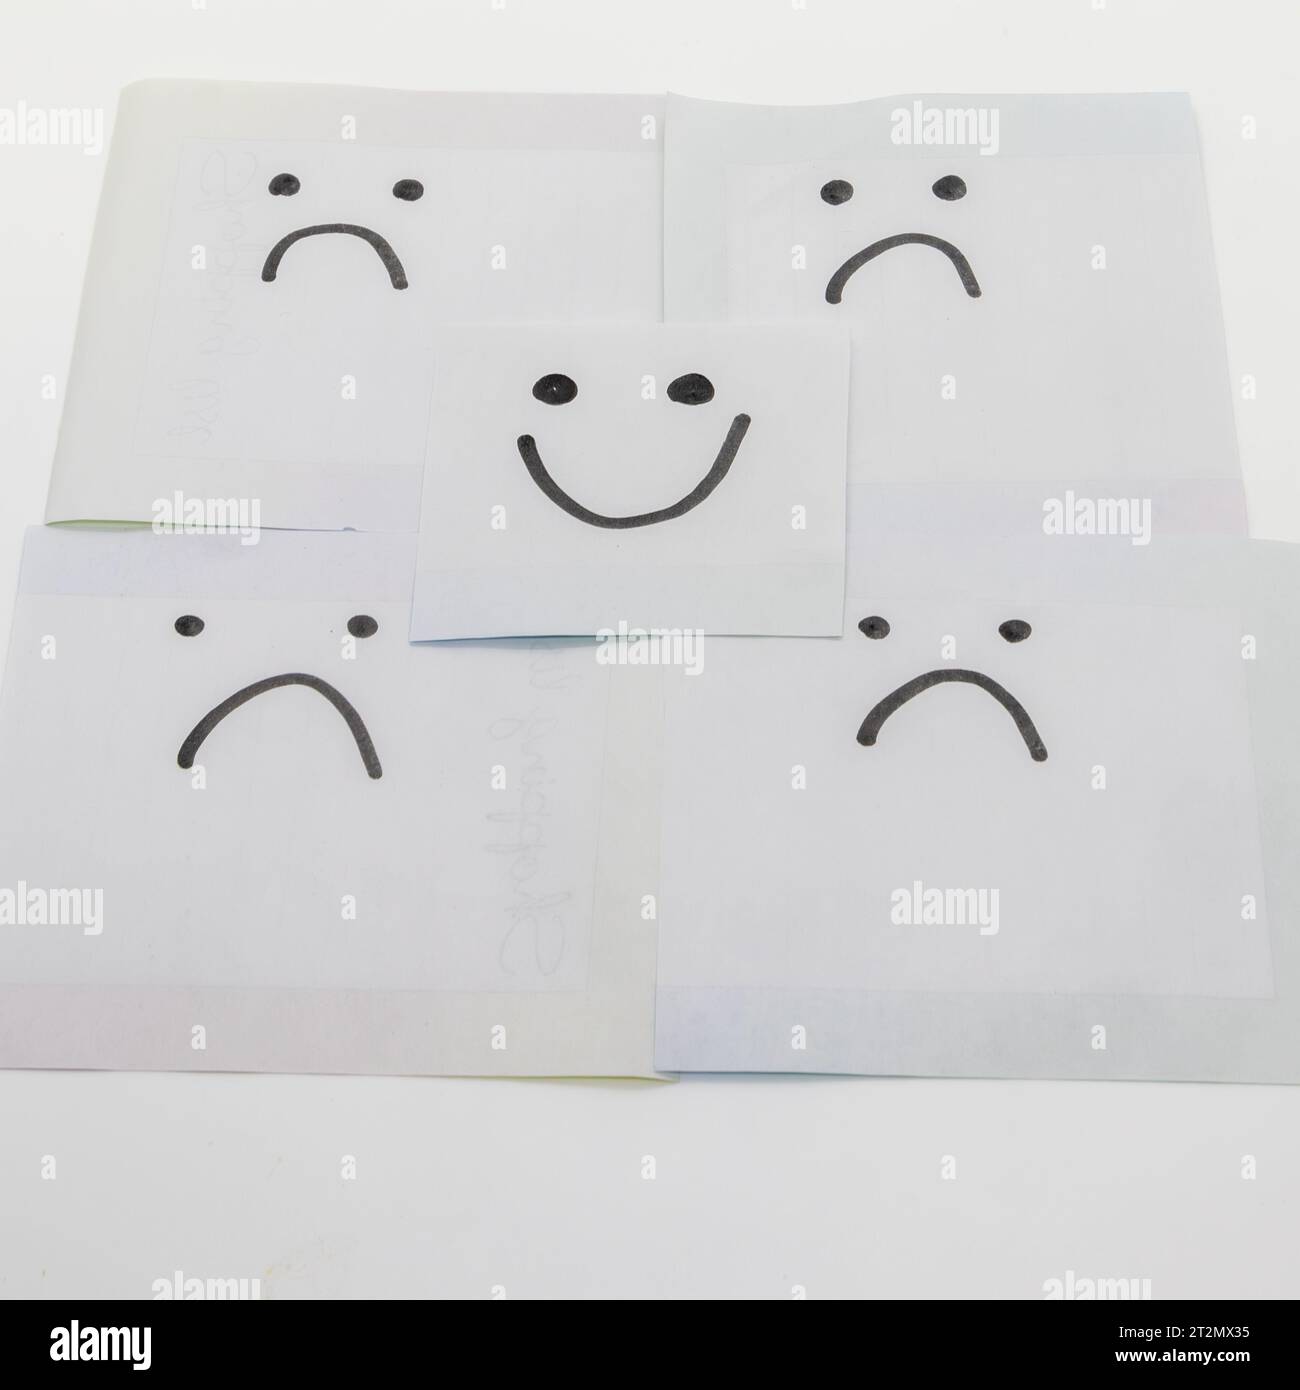 Smiley faces drawn on paper Stock Photo